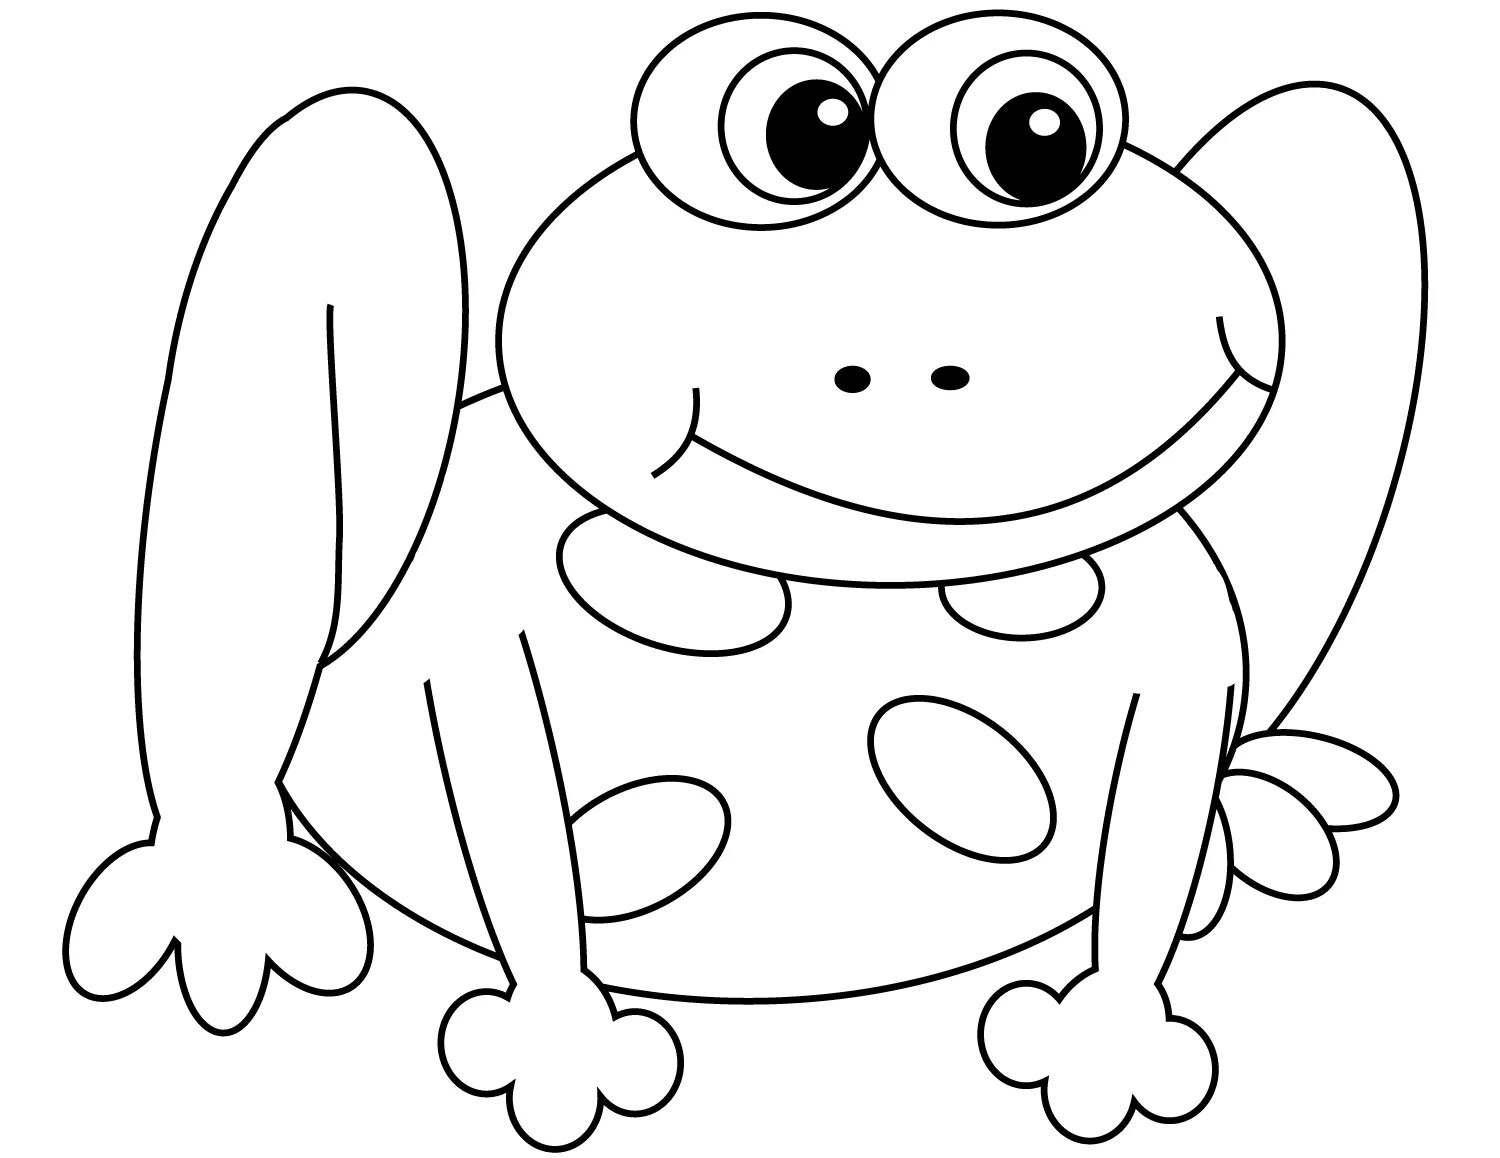 Inspirational frog coloring book for kids